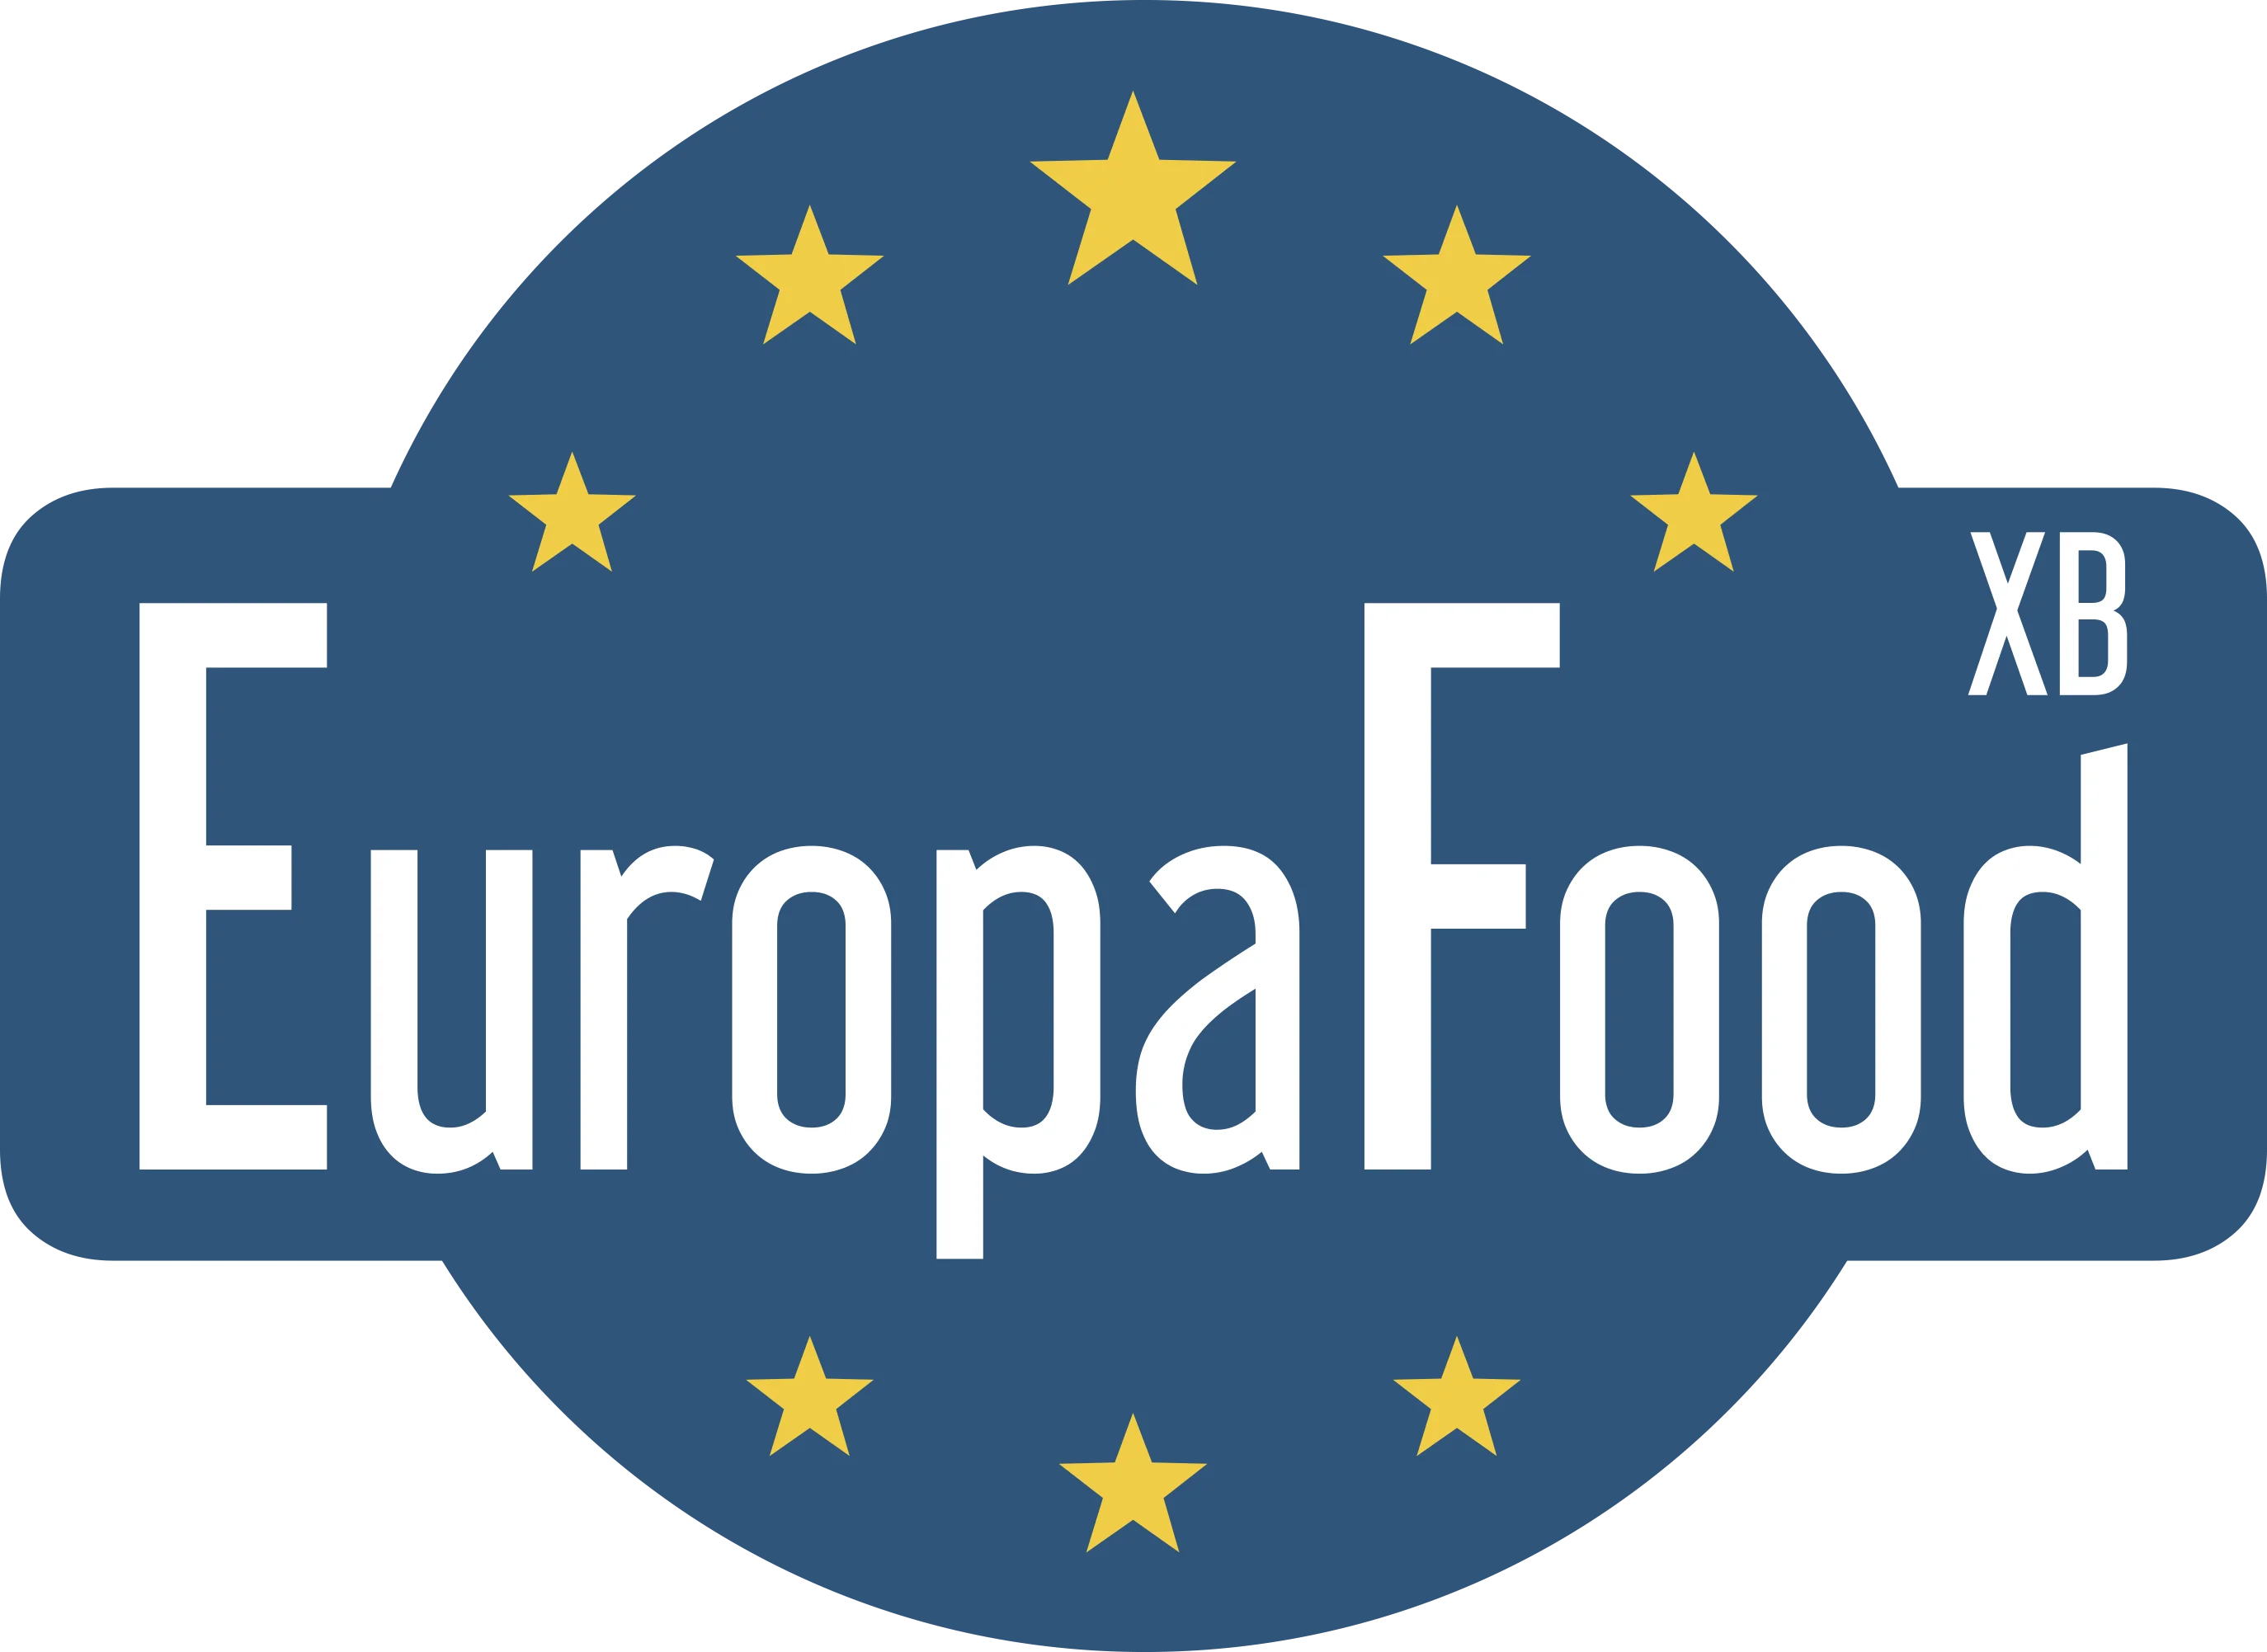 Food Delivery EuropaFoodXB